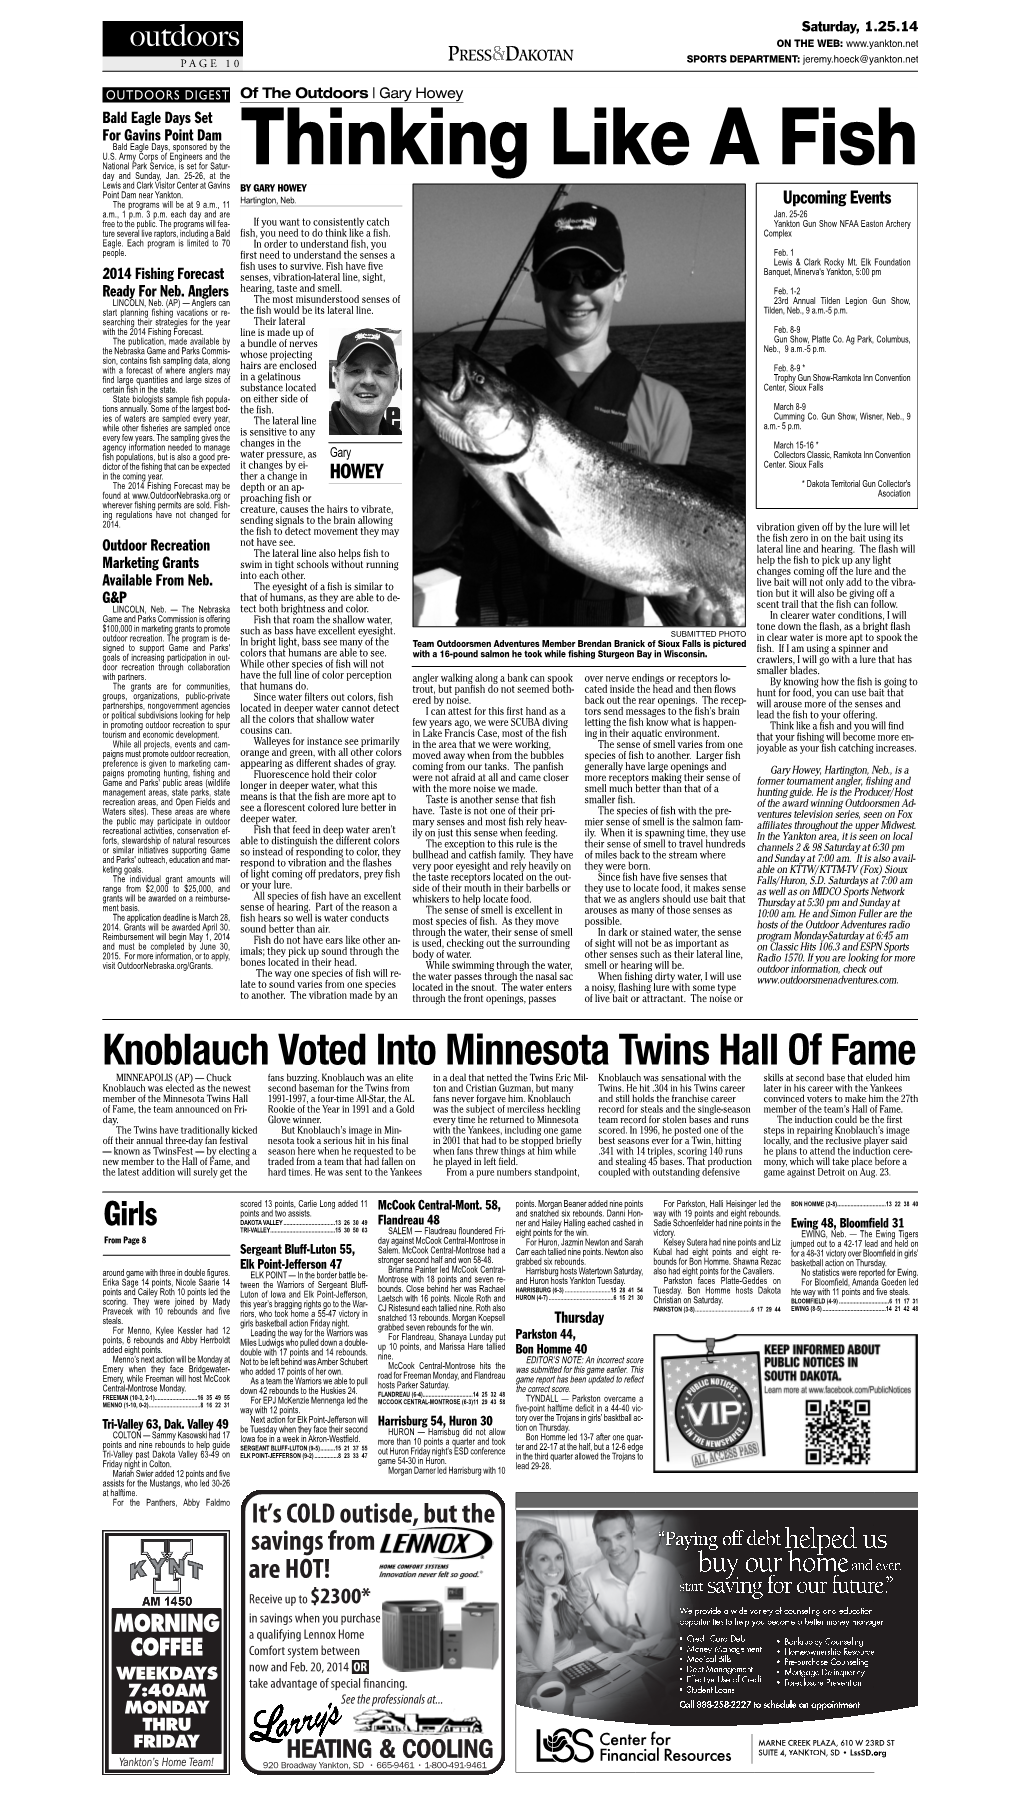 Knoblauch Voted Into Minnesota Twins Hall of Fame MINNEAPOLIS (AP) — Chuck Fans Buzzing